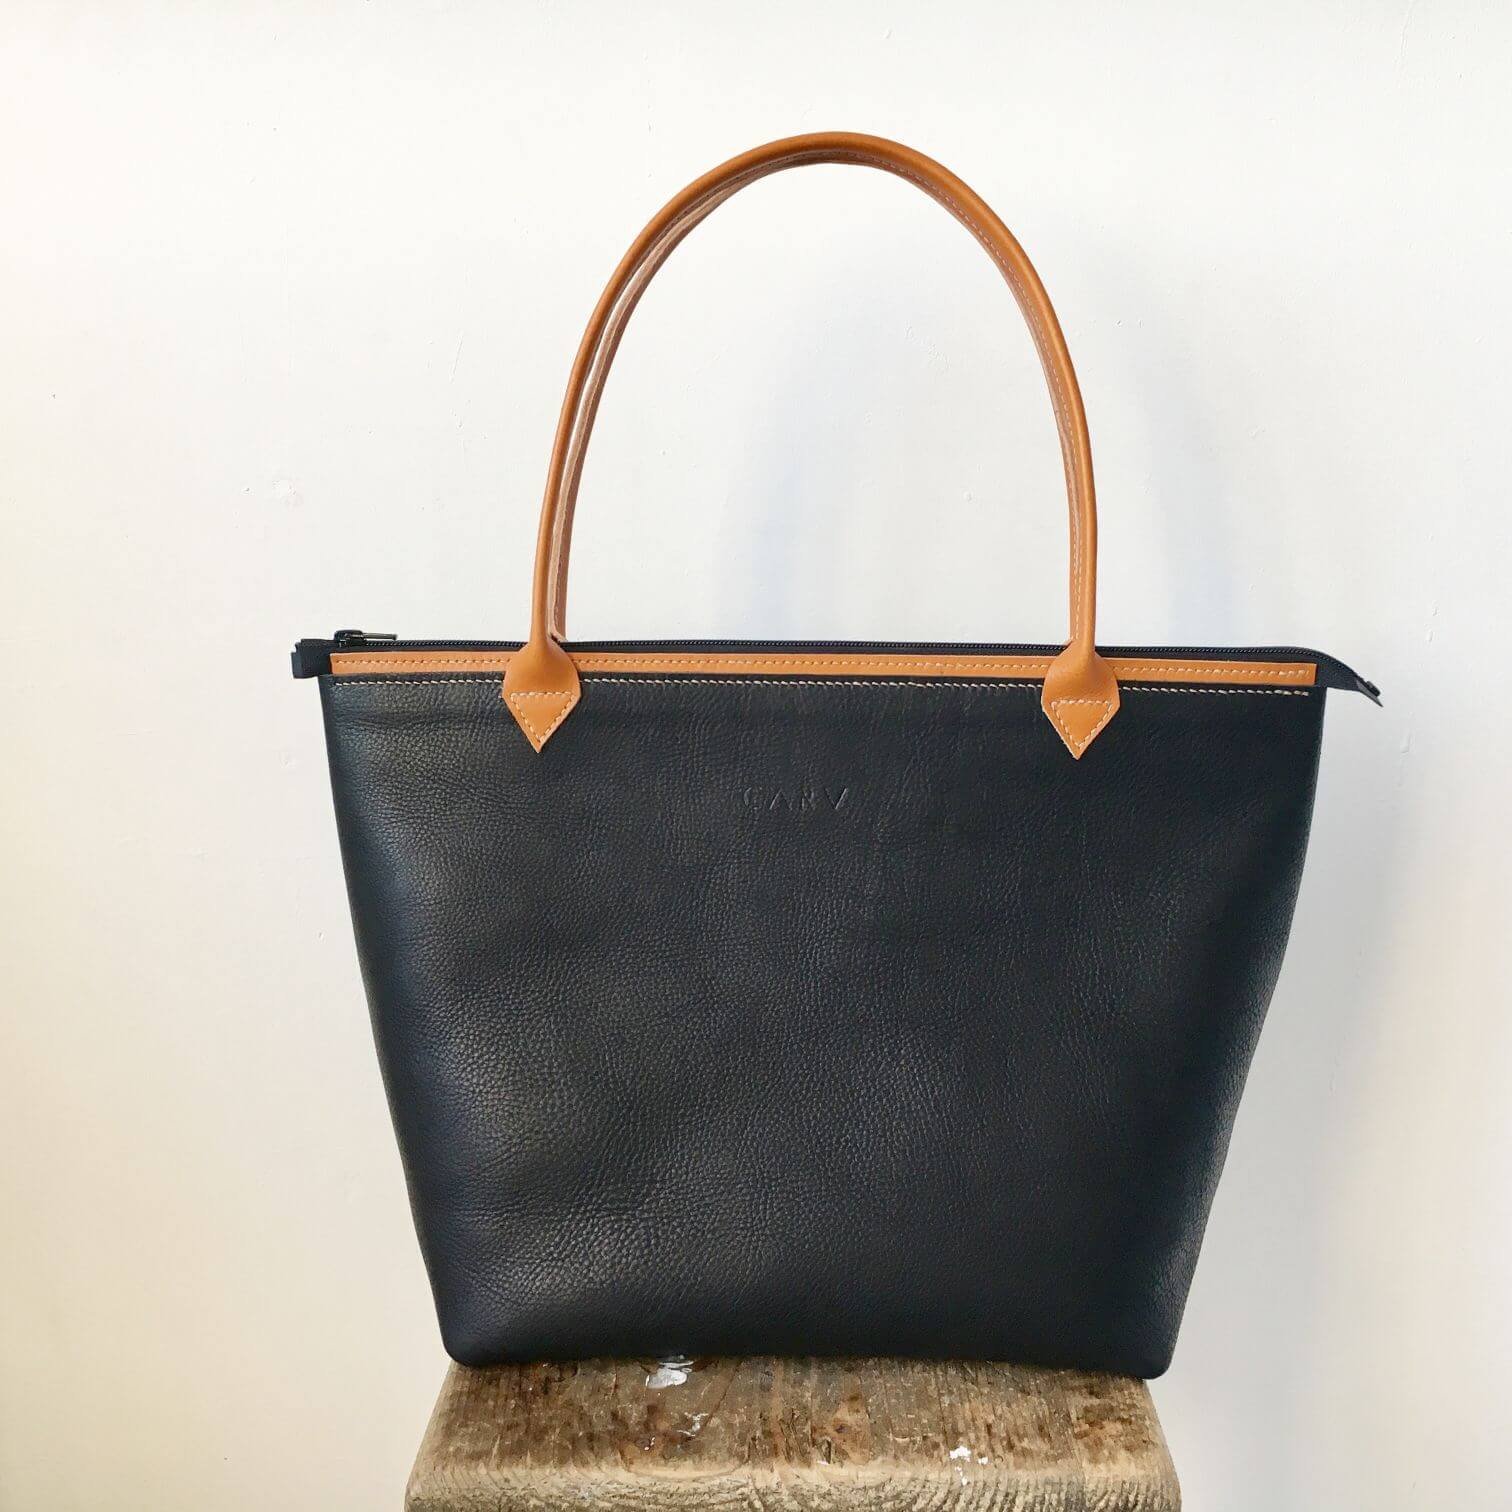 CARV sustainable leather bag in black custom made in the UK